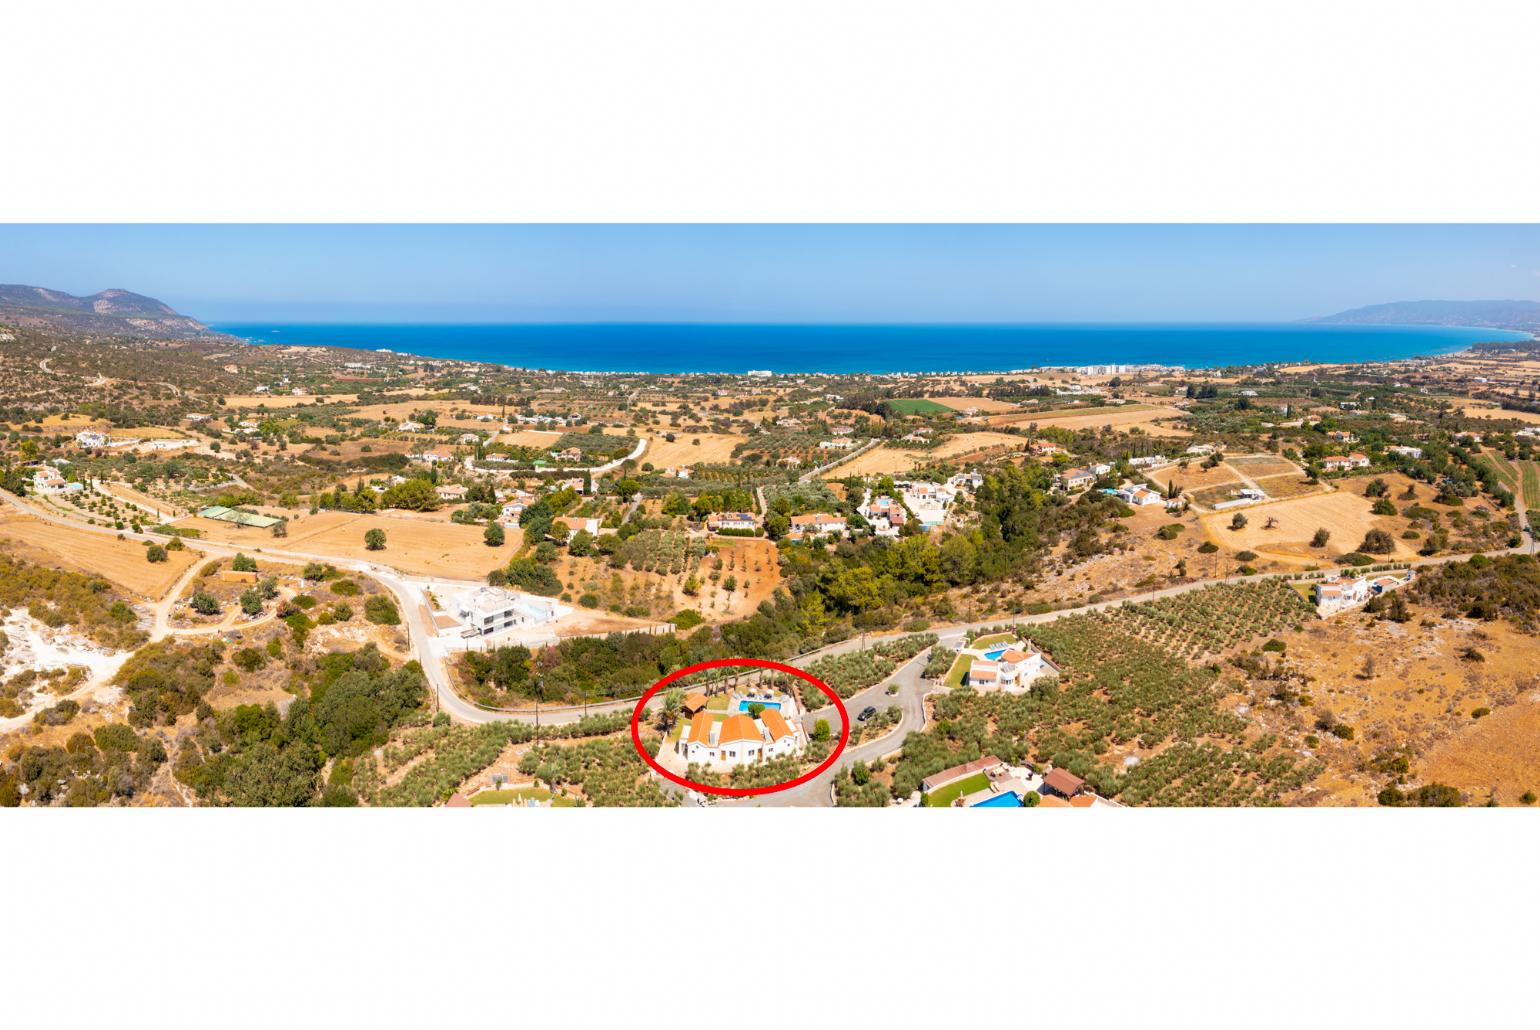 Aerial view showing location of Villa Amorosa